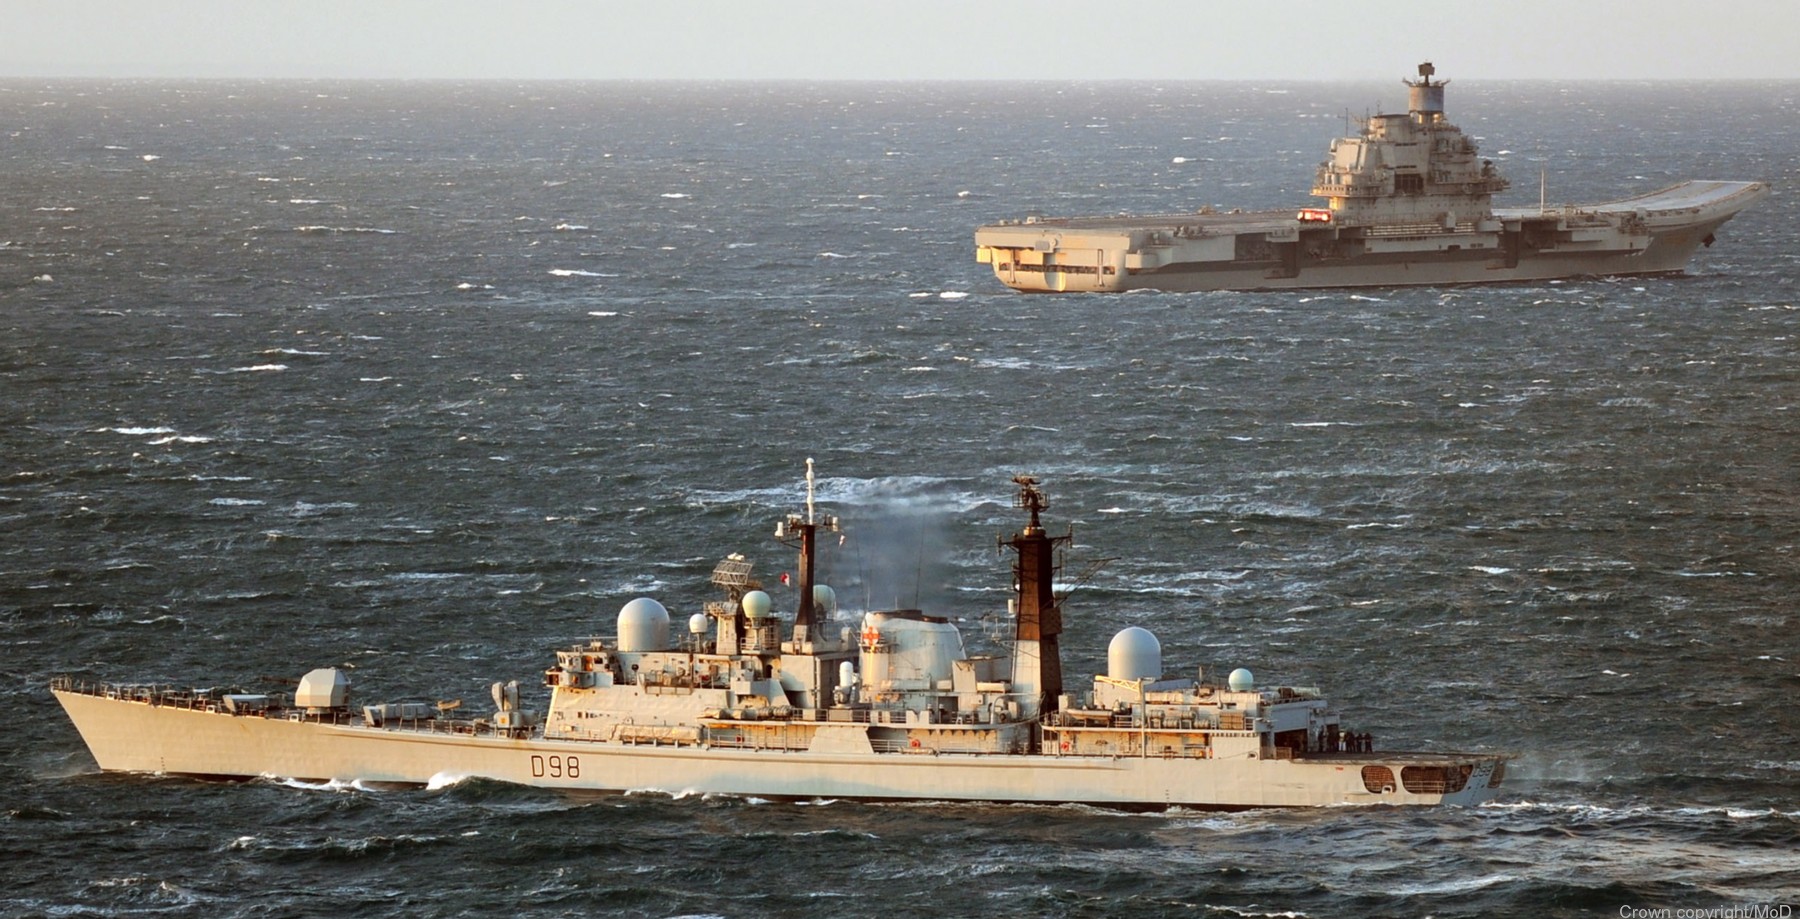 d-98 hms york type 42 sheffield class guided missile destroyer royal navy 04